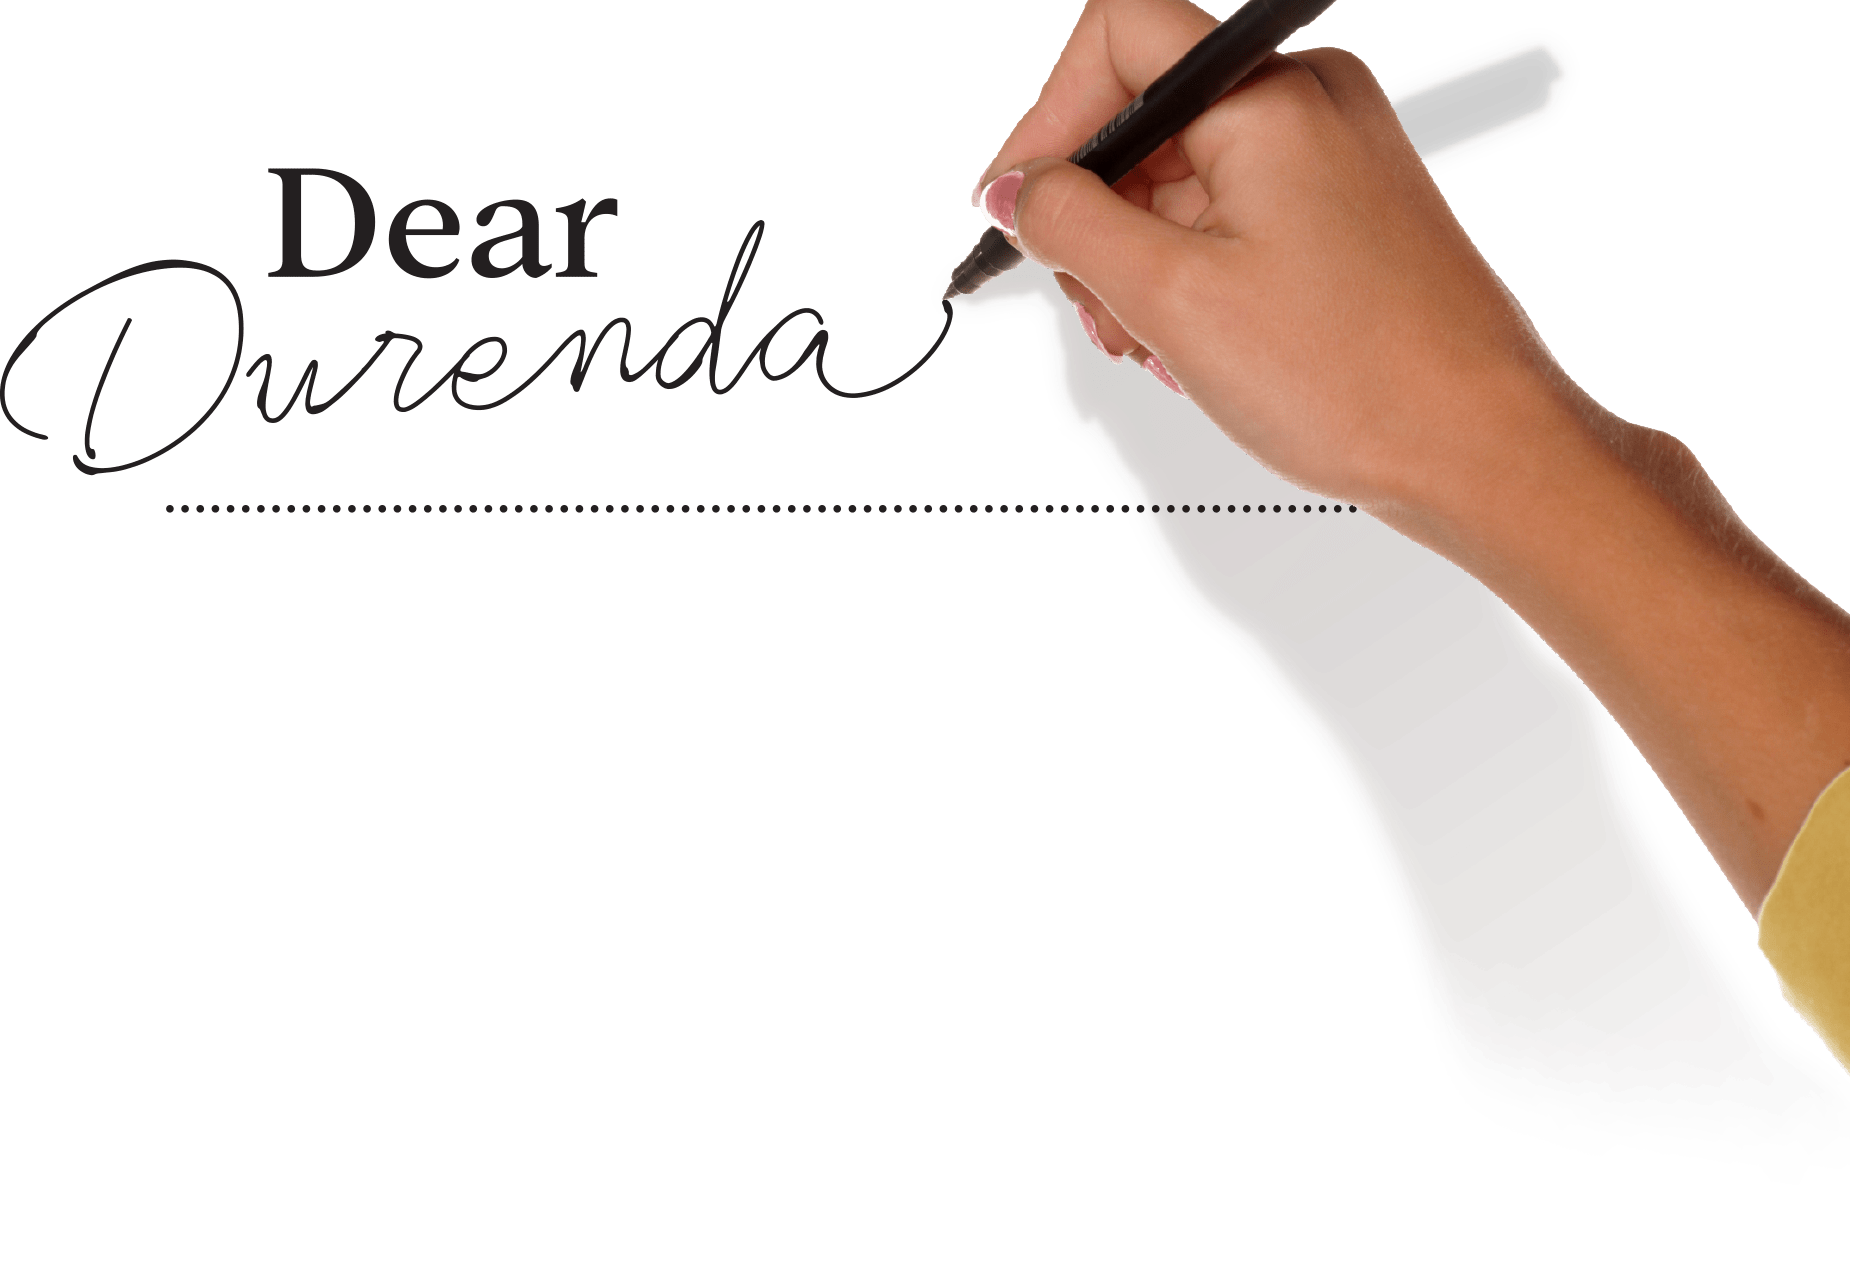 Dear Durenda typography with an image of a hand writing